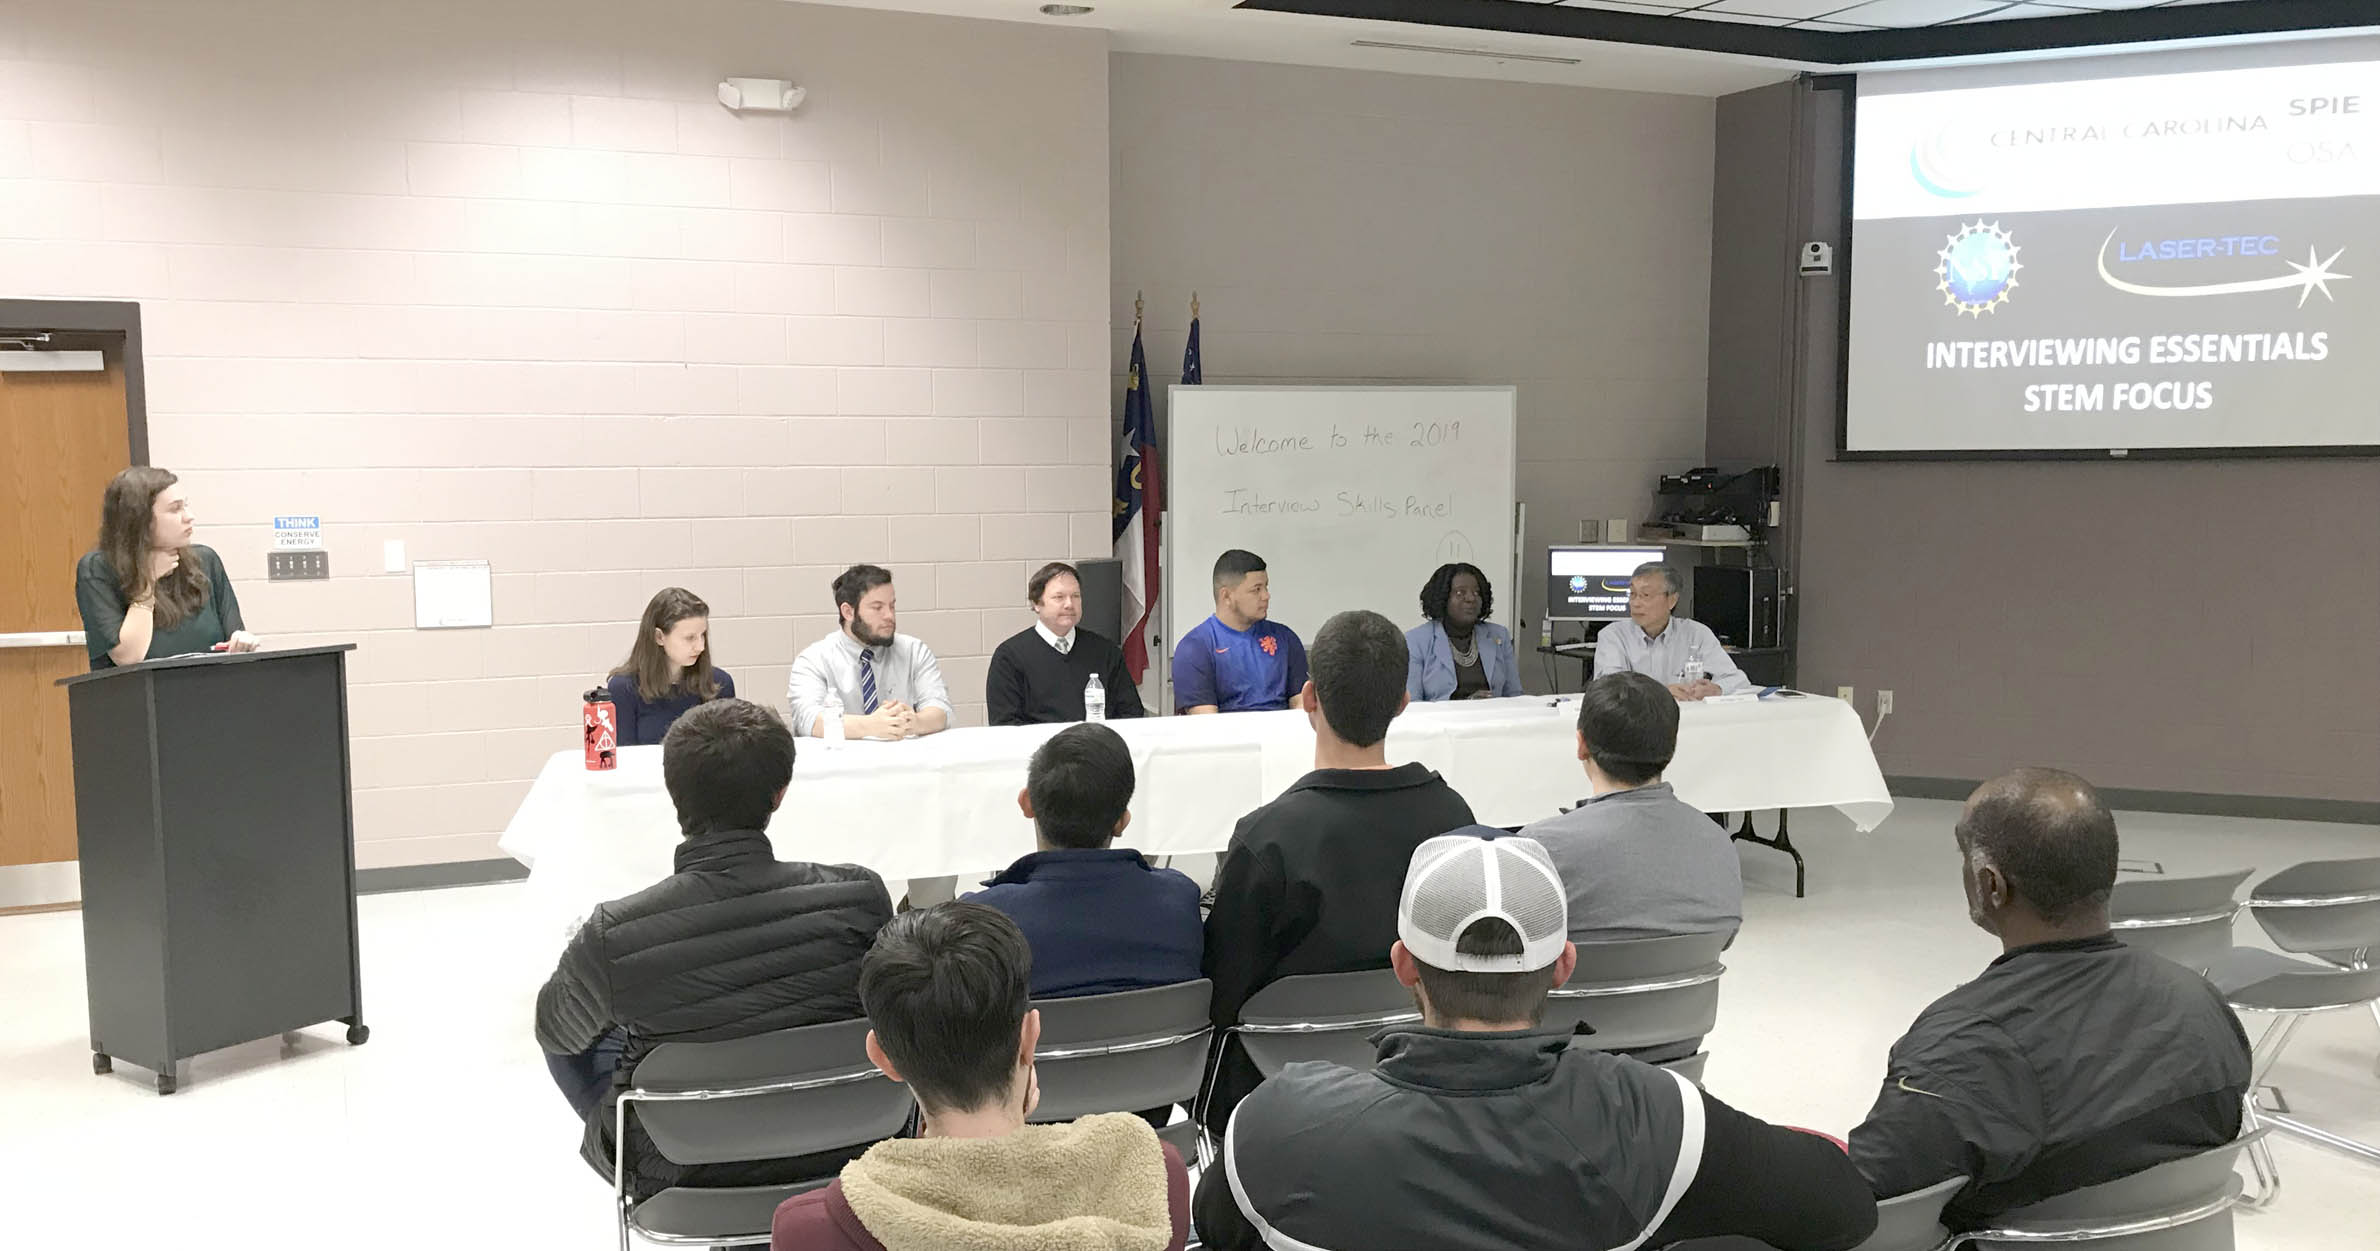 CCCC SPIE Student Chapter hosts 'Interviewing Skills Panel' event